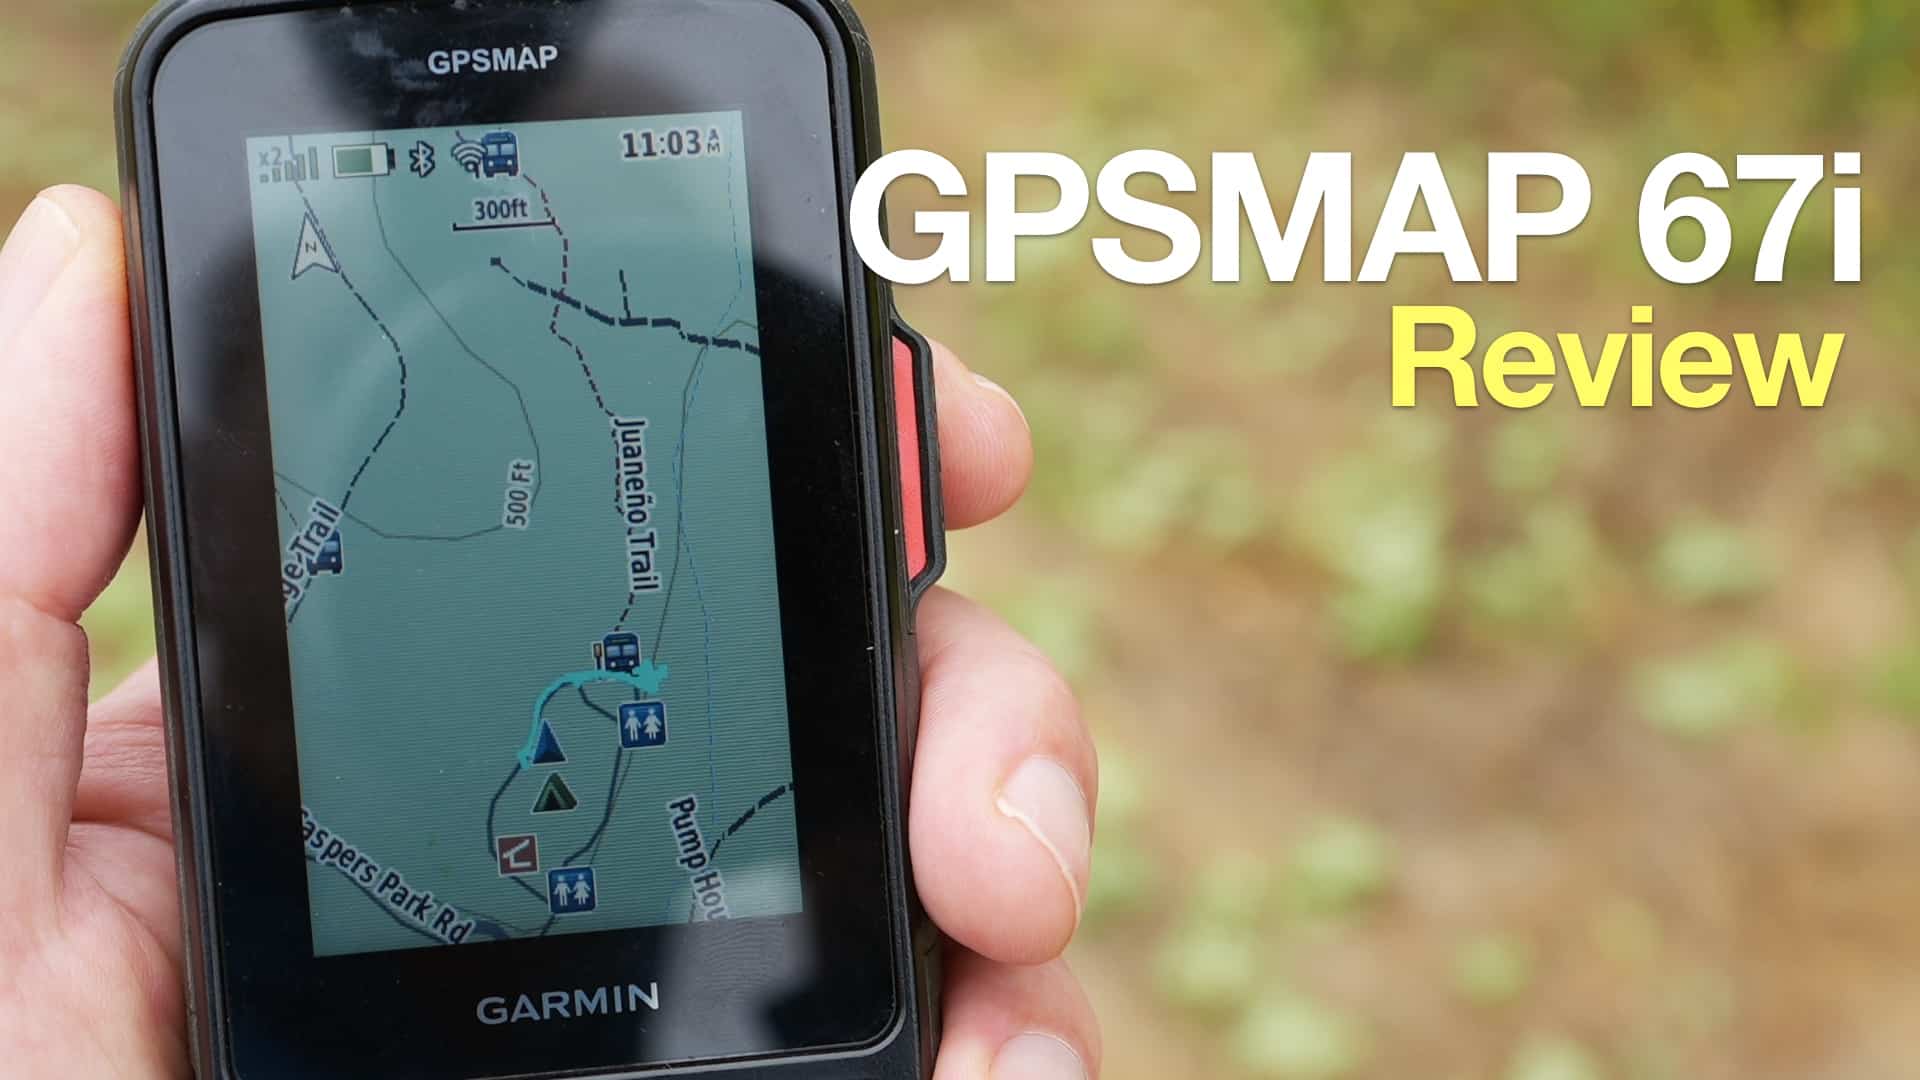 Part 2 - Practice Using a GPS Device